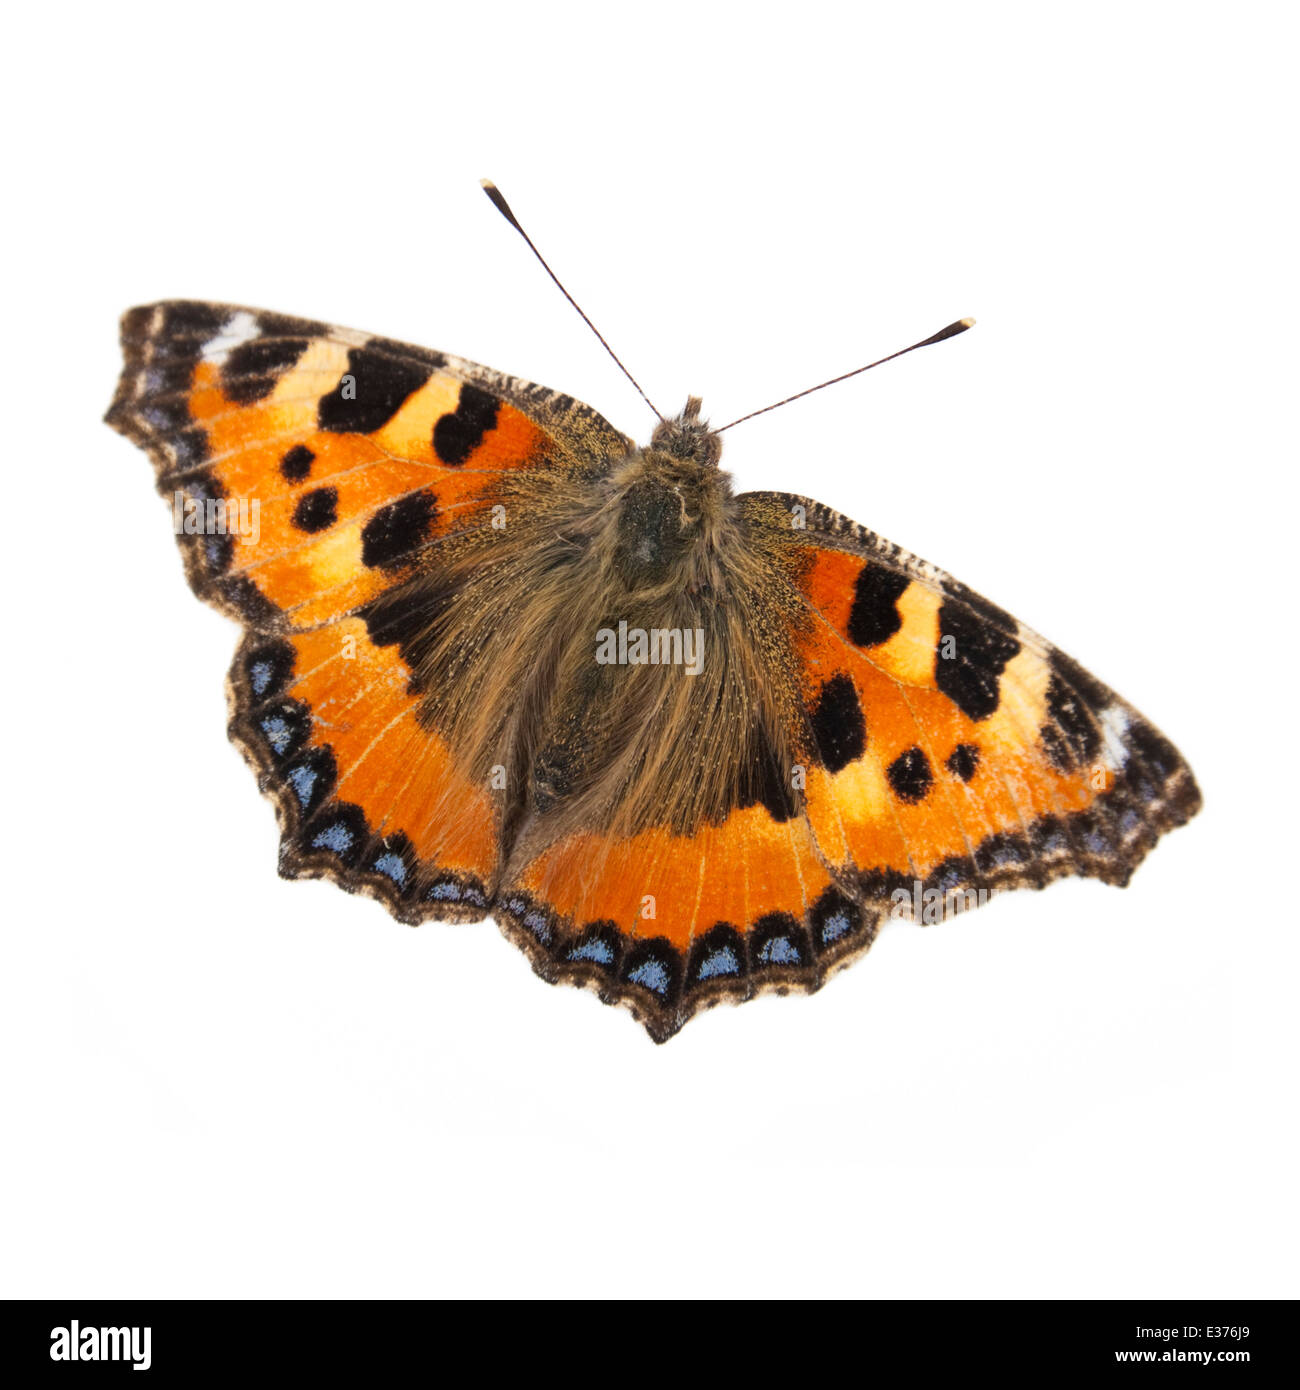 Studio shot of the Small Tortoiseshell butterfly (Aglais urticae), once a very common butterfly in Britain but now threatened. Stock Photo